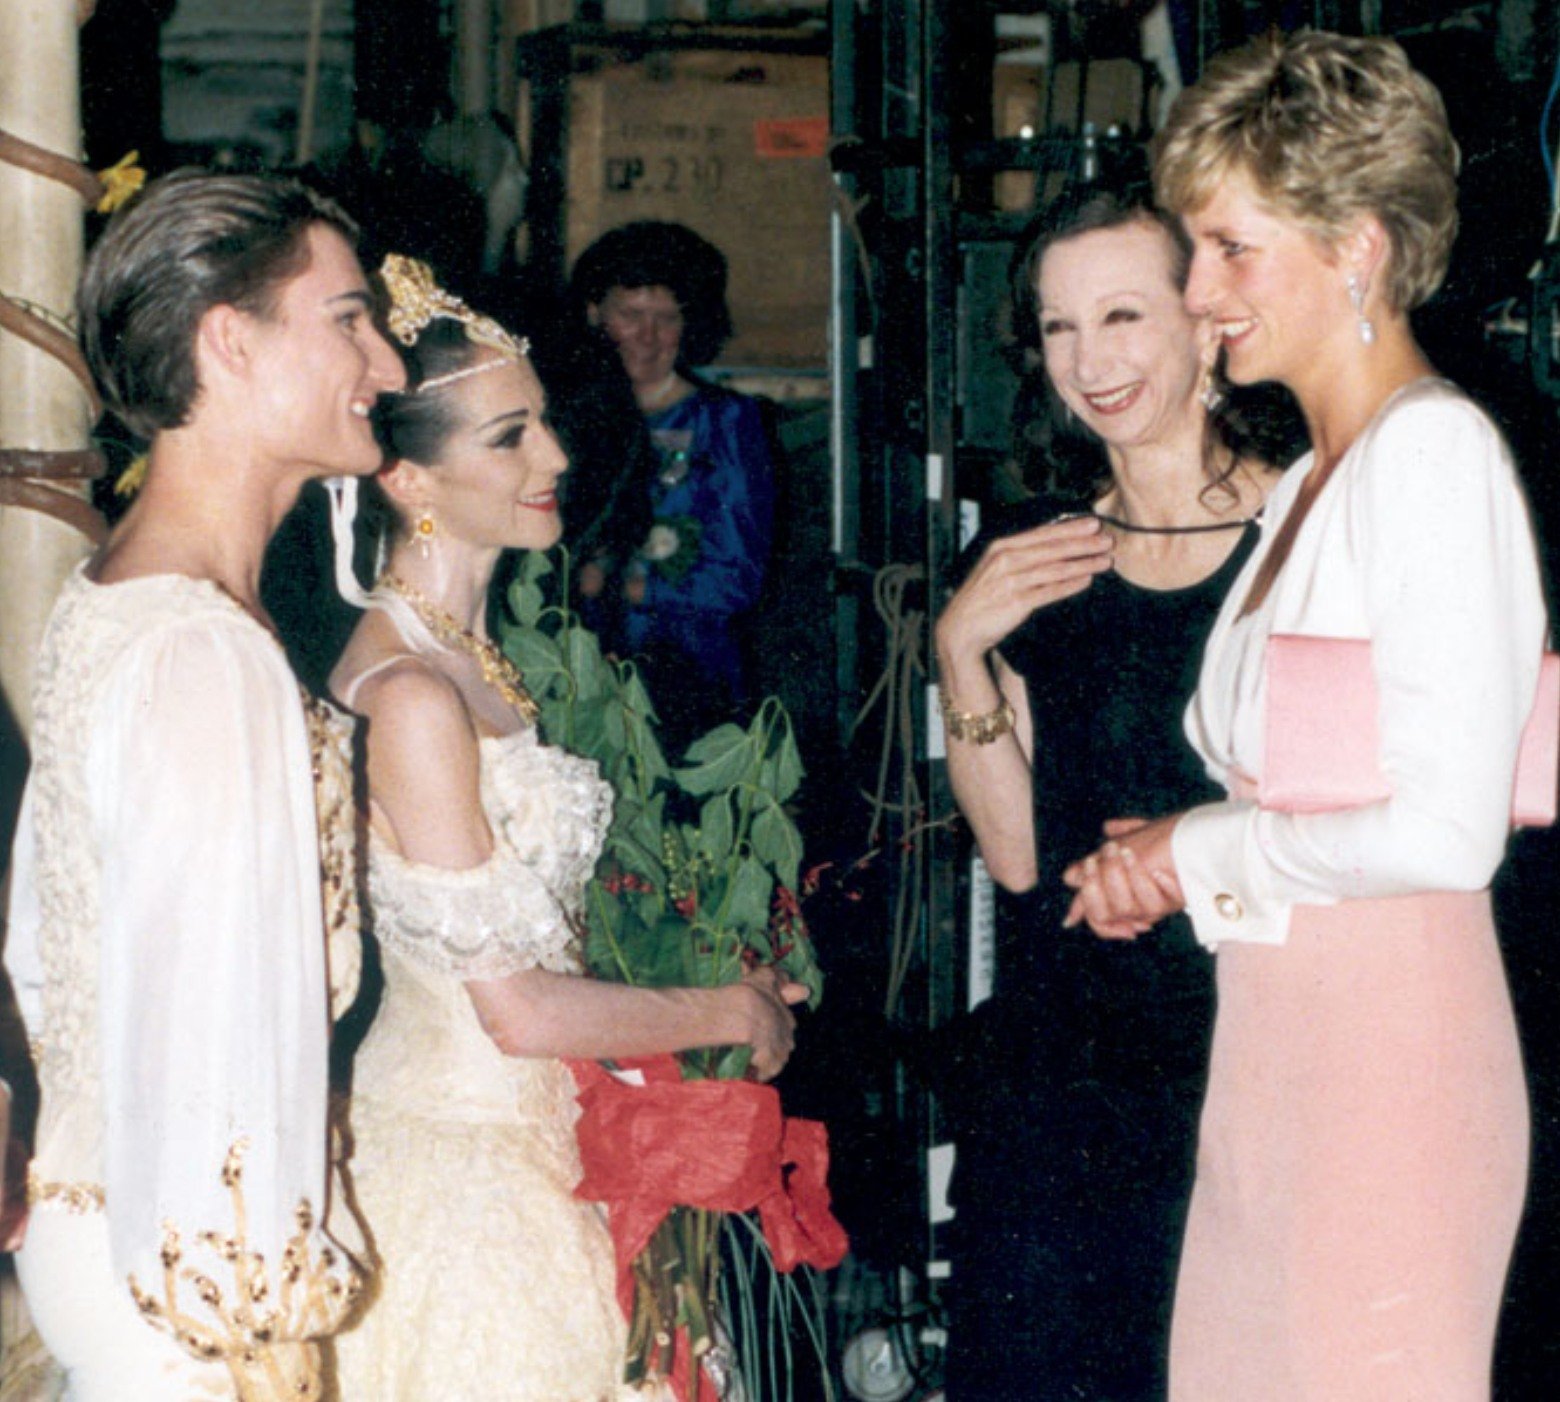  Miranda Coney (1982) and David McAllister AC (1980) after a stunning 1992 performance of Coppelia, meeting Diana, Princess of Wales. Photo by Ronald G Bell; The Australian Ballet archive, and appears in David McAllister's memoir Soar: A Life Freed b